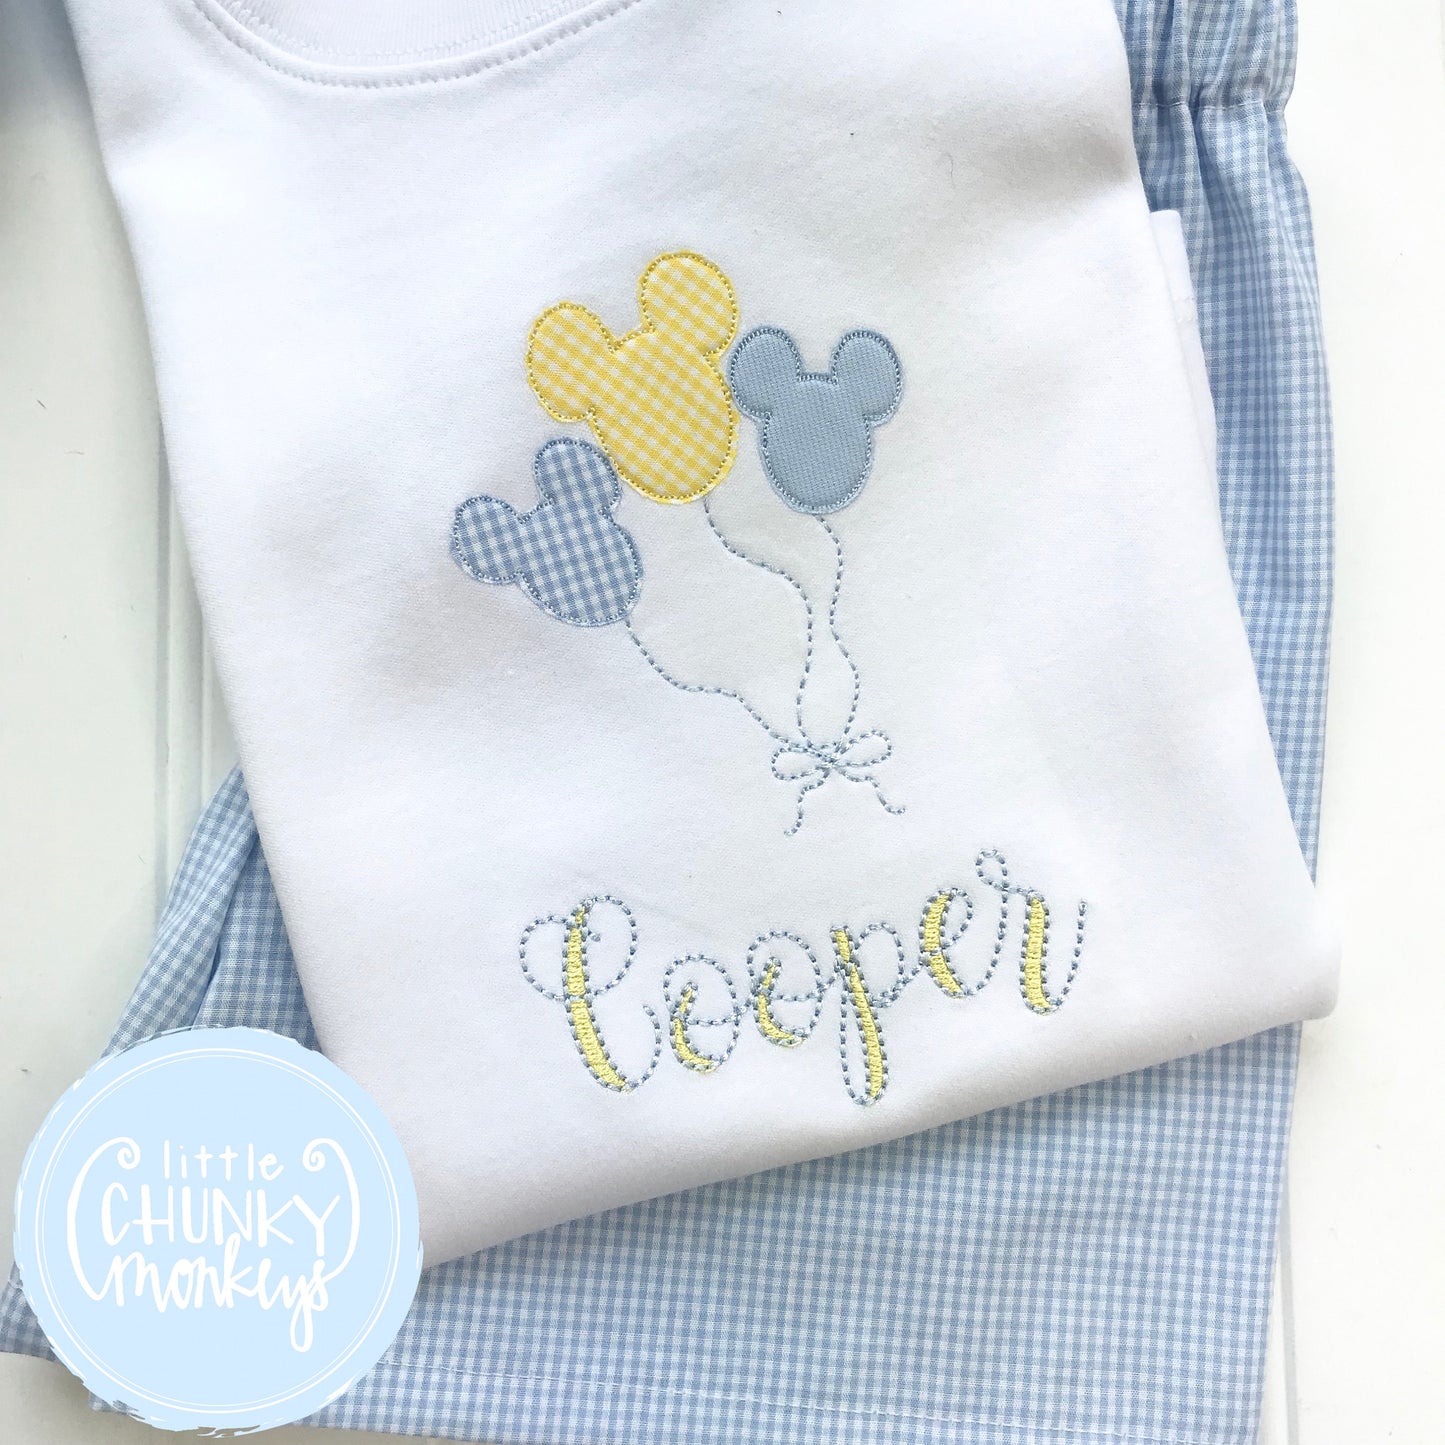 Boy Shirt - Boy Birthday Shirt - Mouse Balloons with Personalization